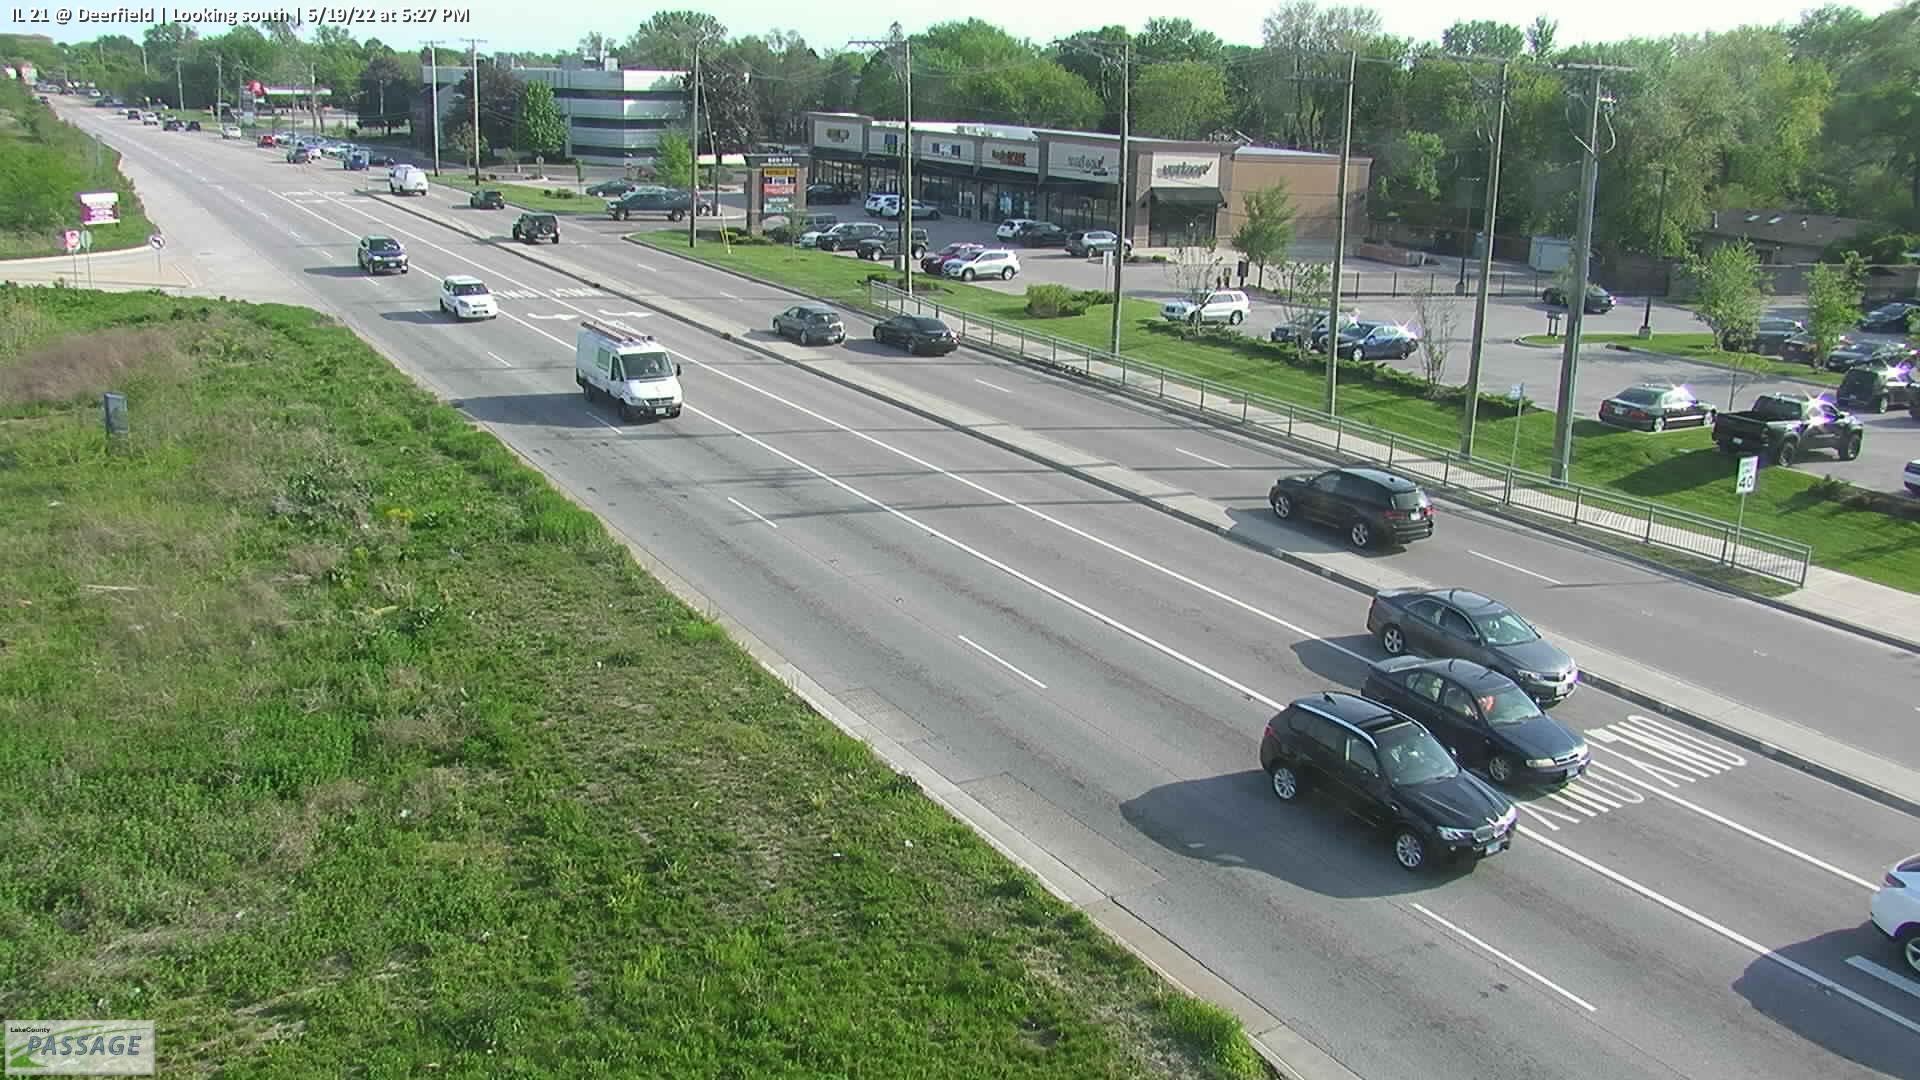 IL 21 @ Deerfield - South Leg - Chicago and Illinois